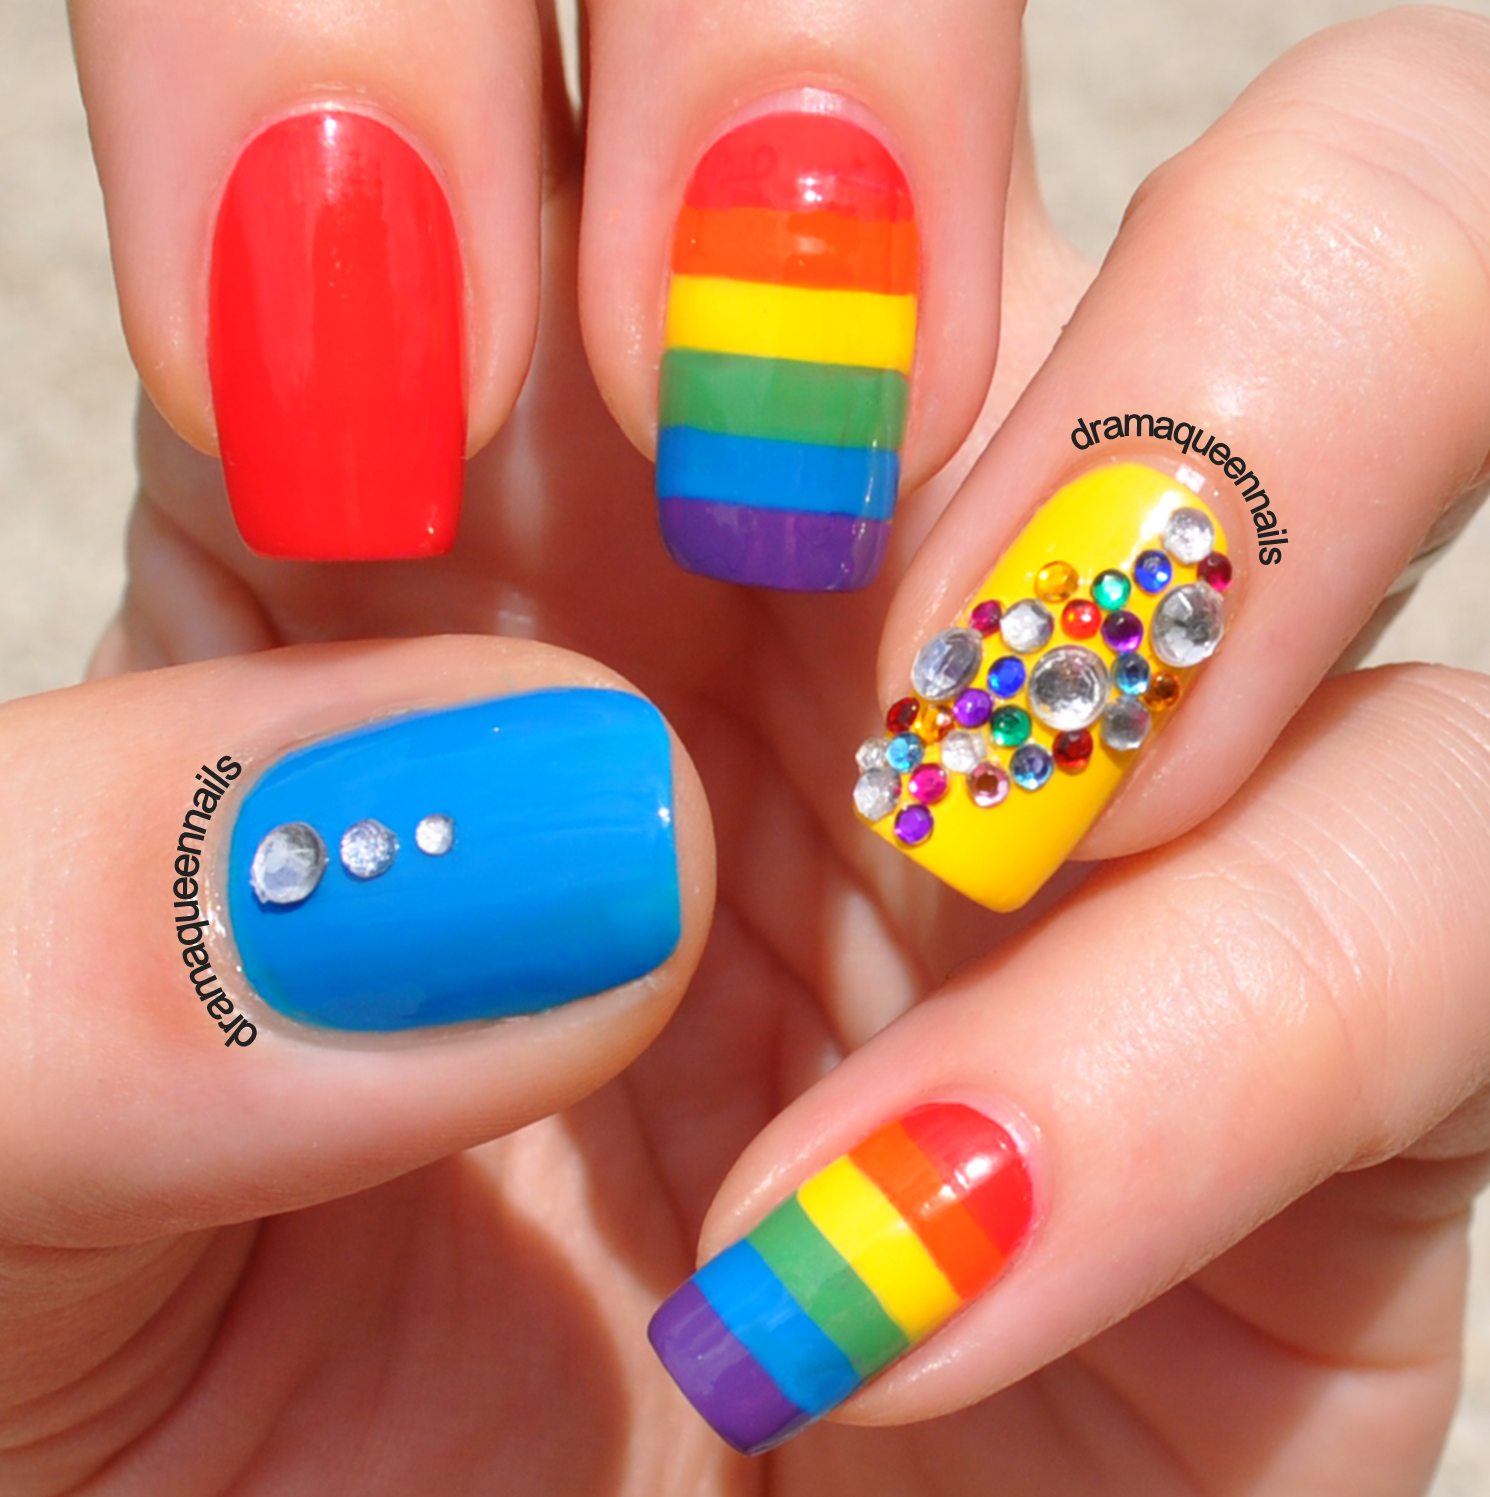 Drama Queen Nails: #31dc2013 - The Round-up Post